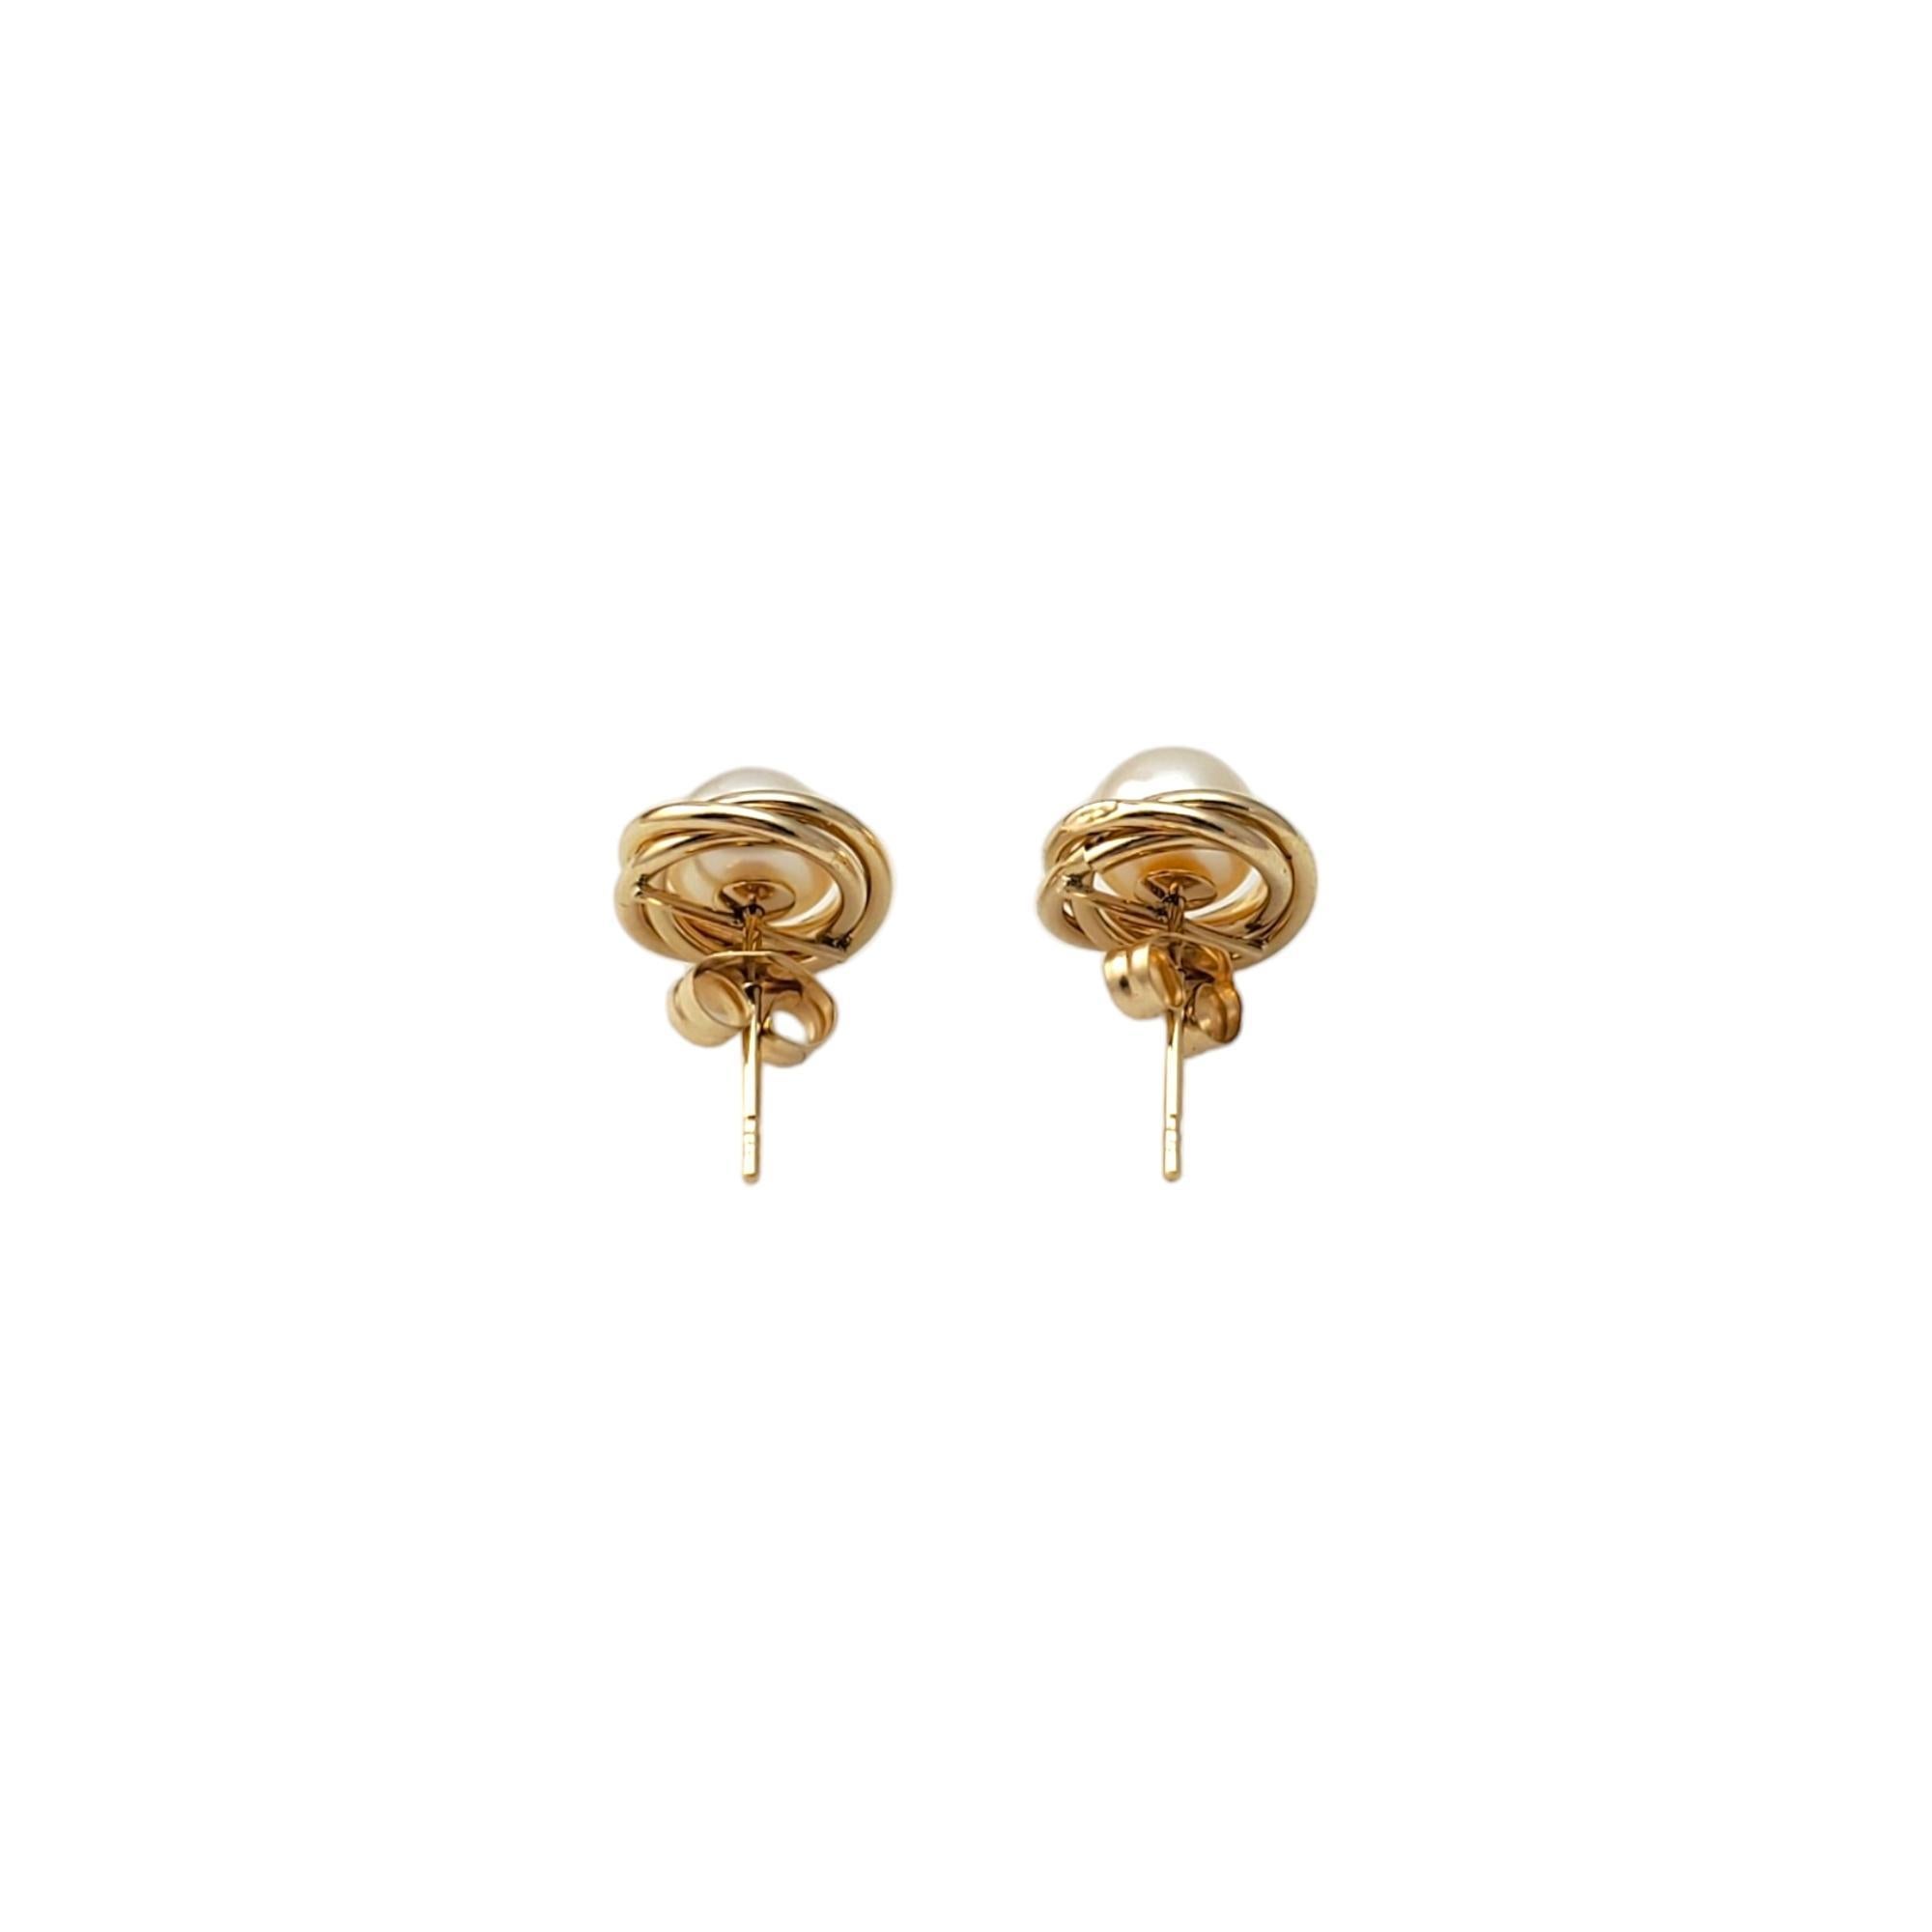 Vintage 14K Yellow Gold Pearl Earrings -

These timeless earrings are crafted in beautifully detailed 14K yellow gold.

Weight: 0.8 dwt/ 1.2 g

Size: 15.74 mm X 9.68mm

Hallmark: 585 

Very good condition, professionally polished.

Will come